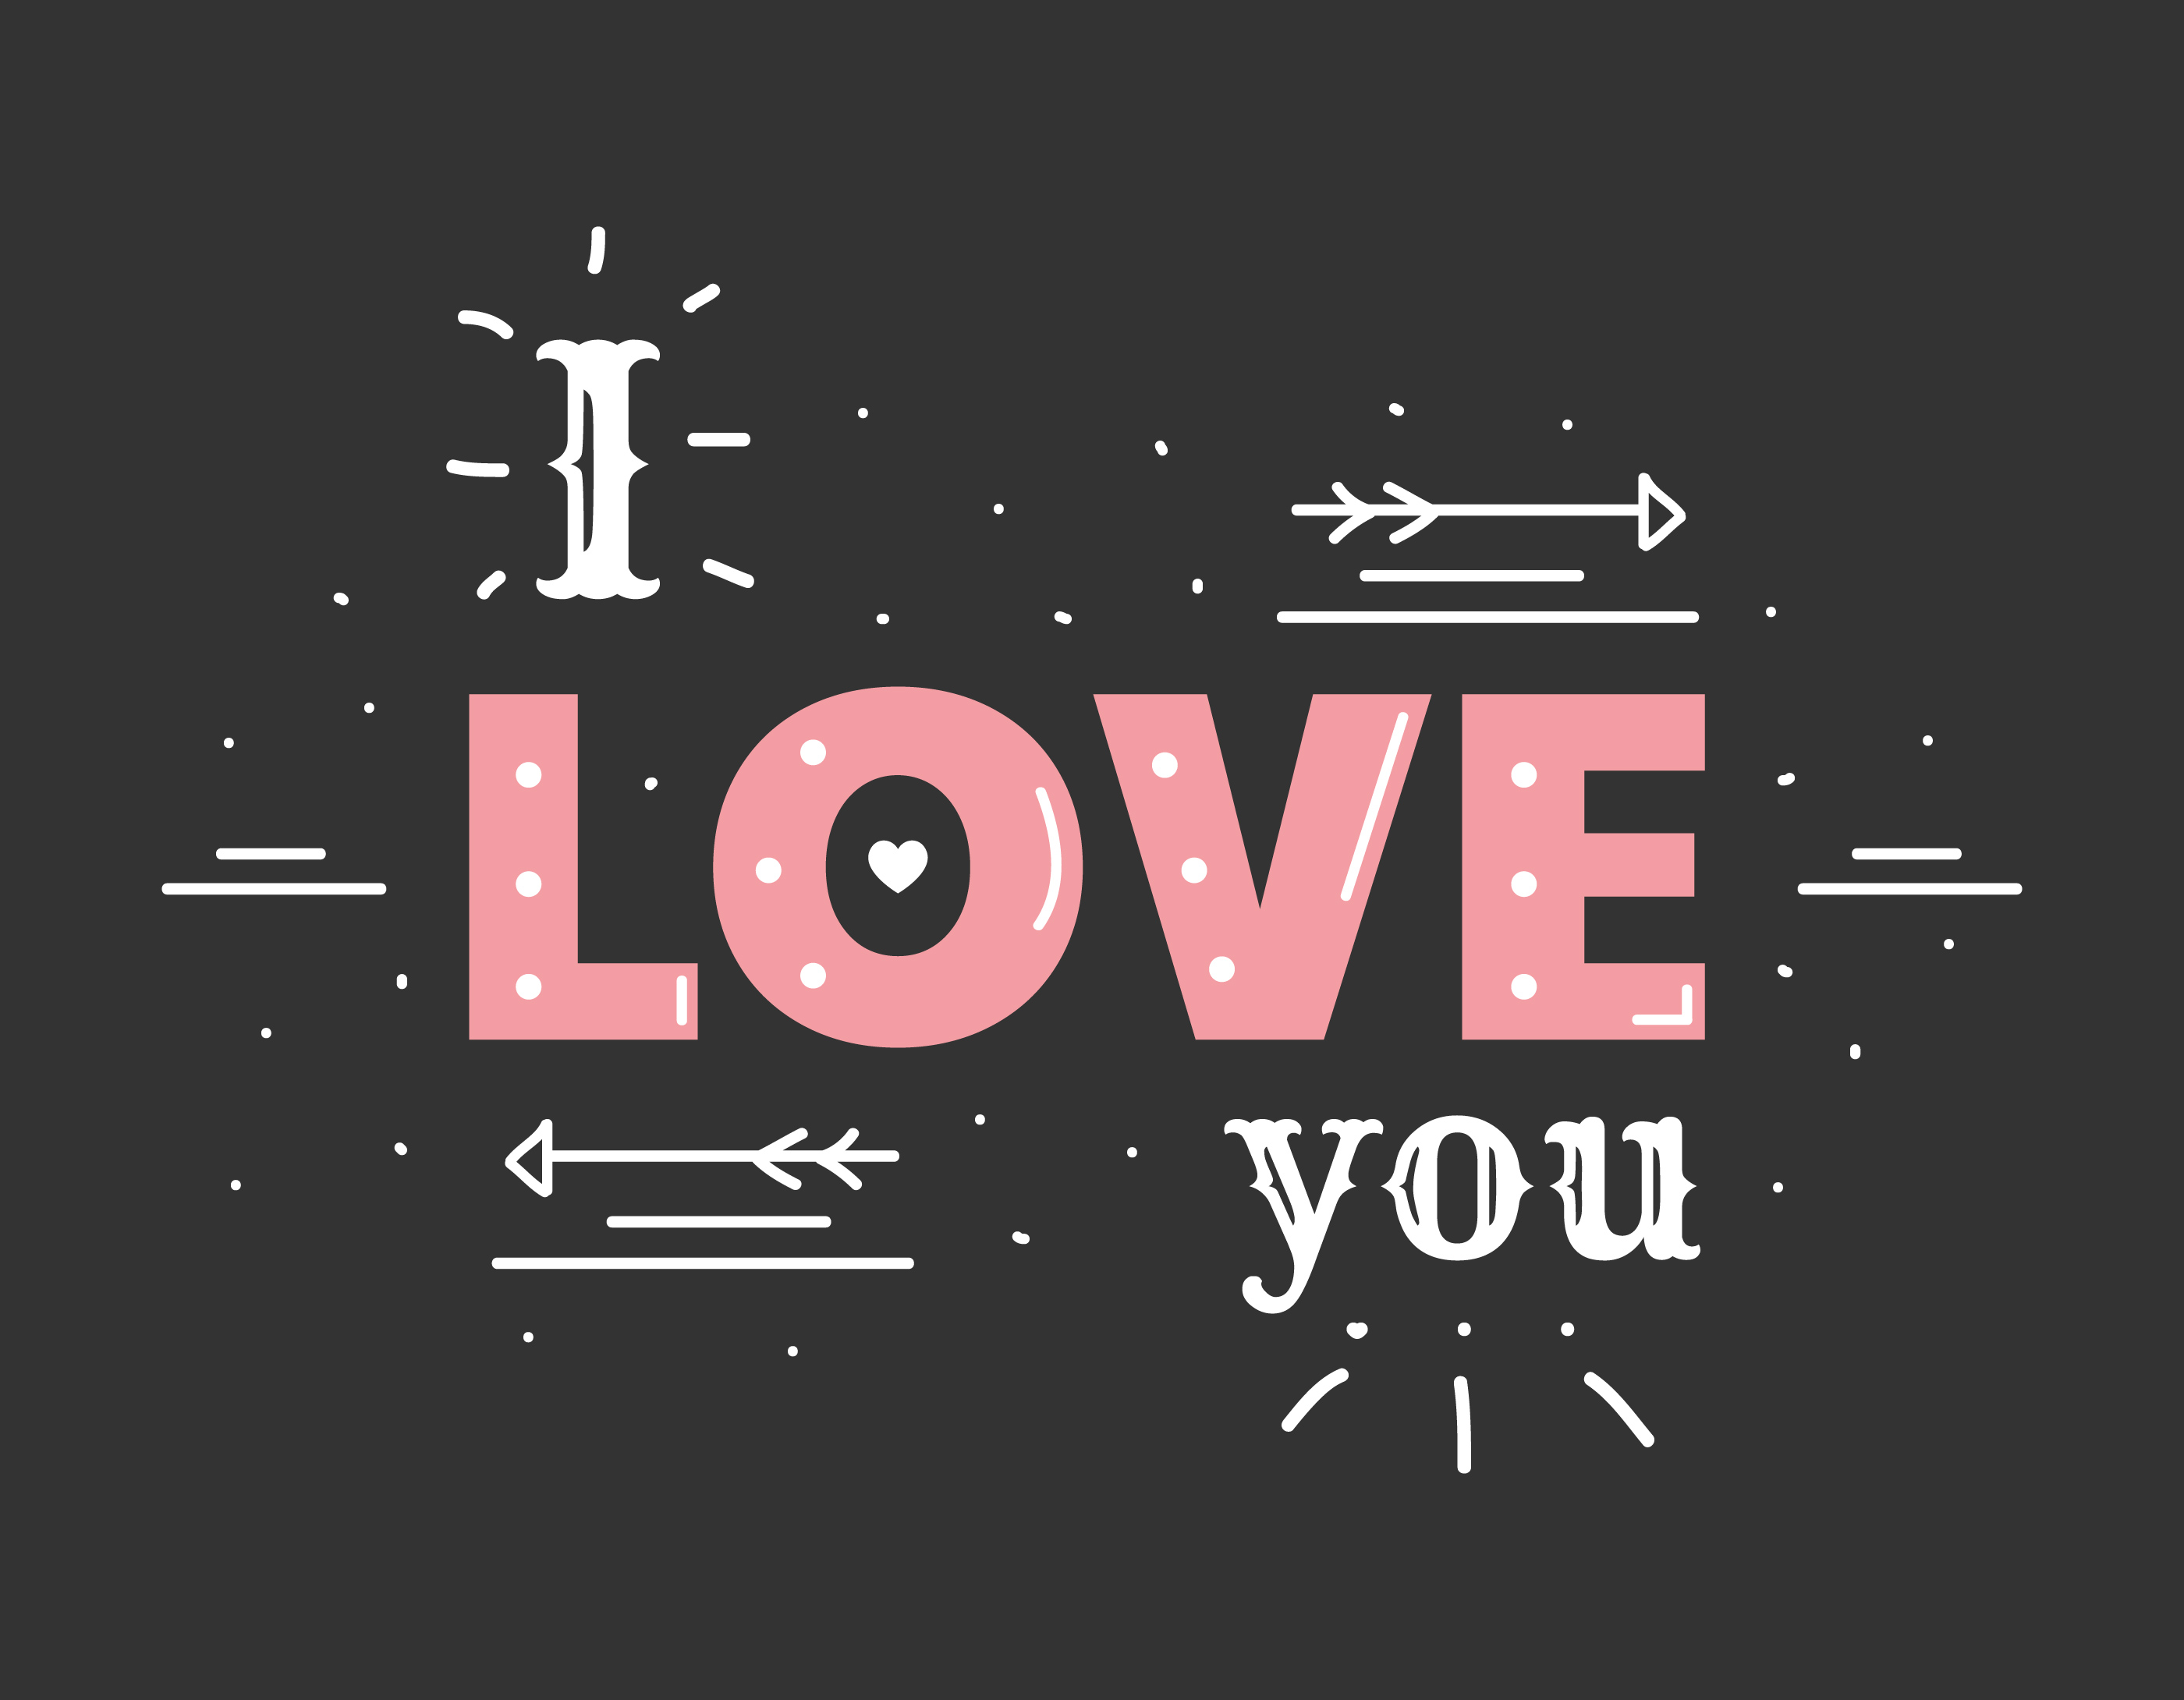 I love you images for him free download mp3